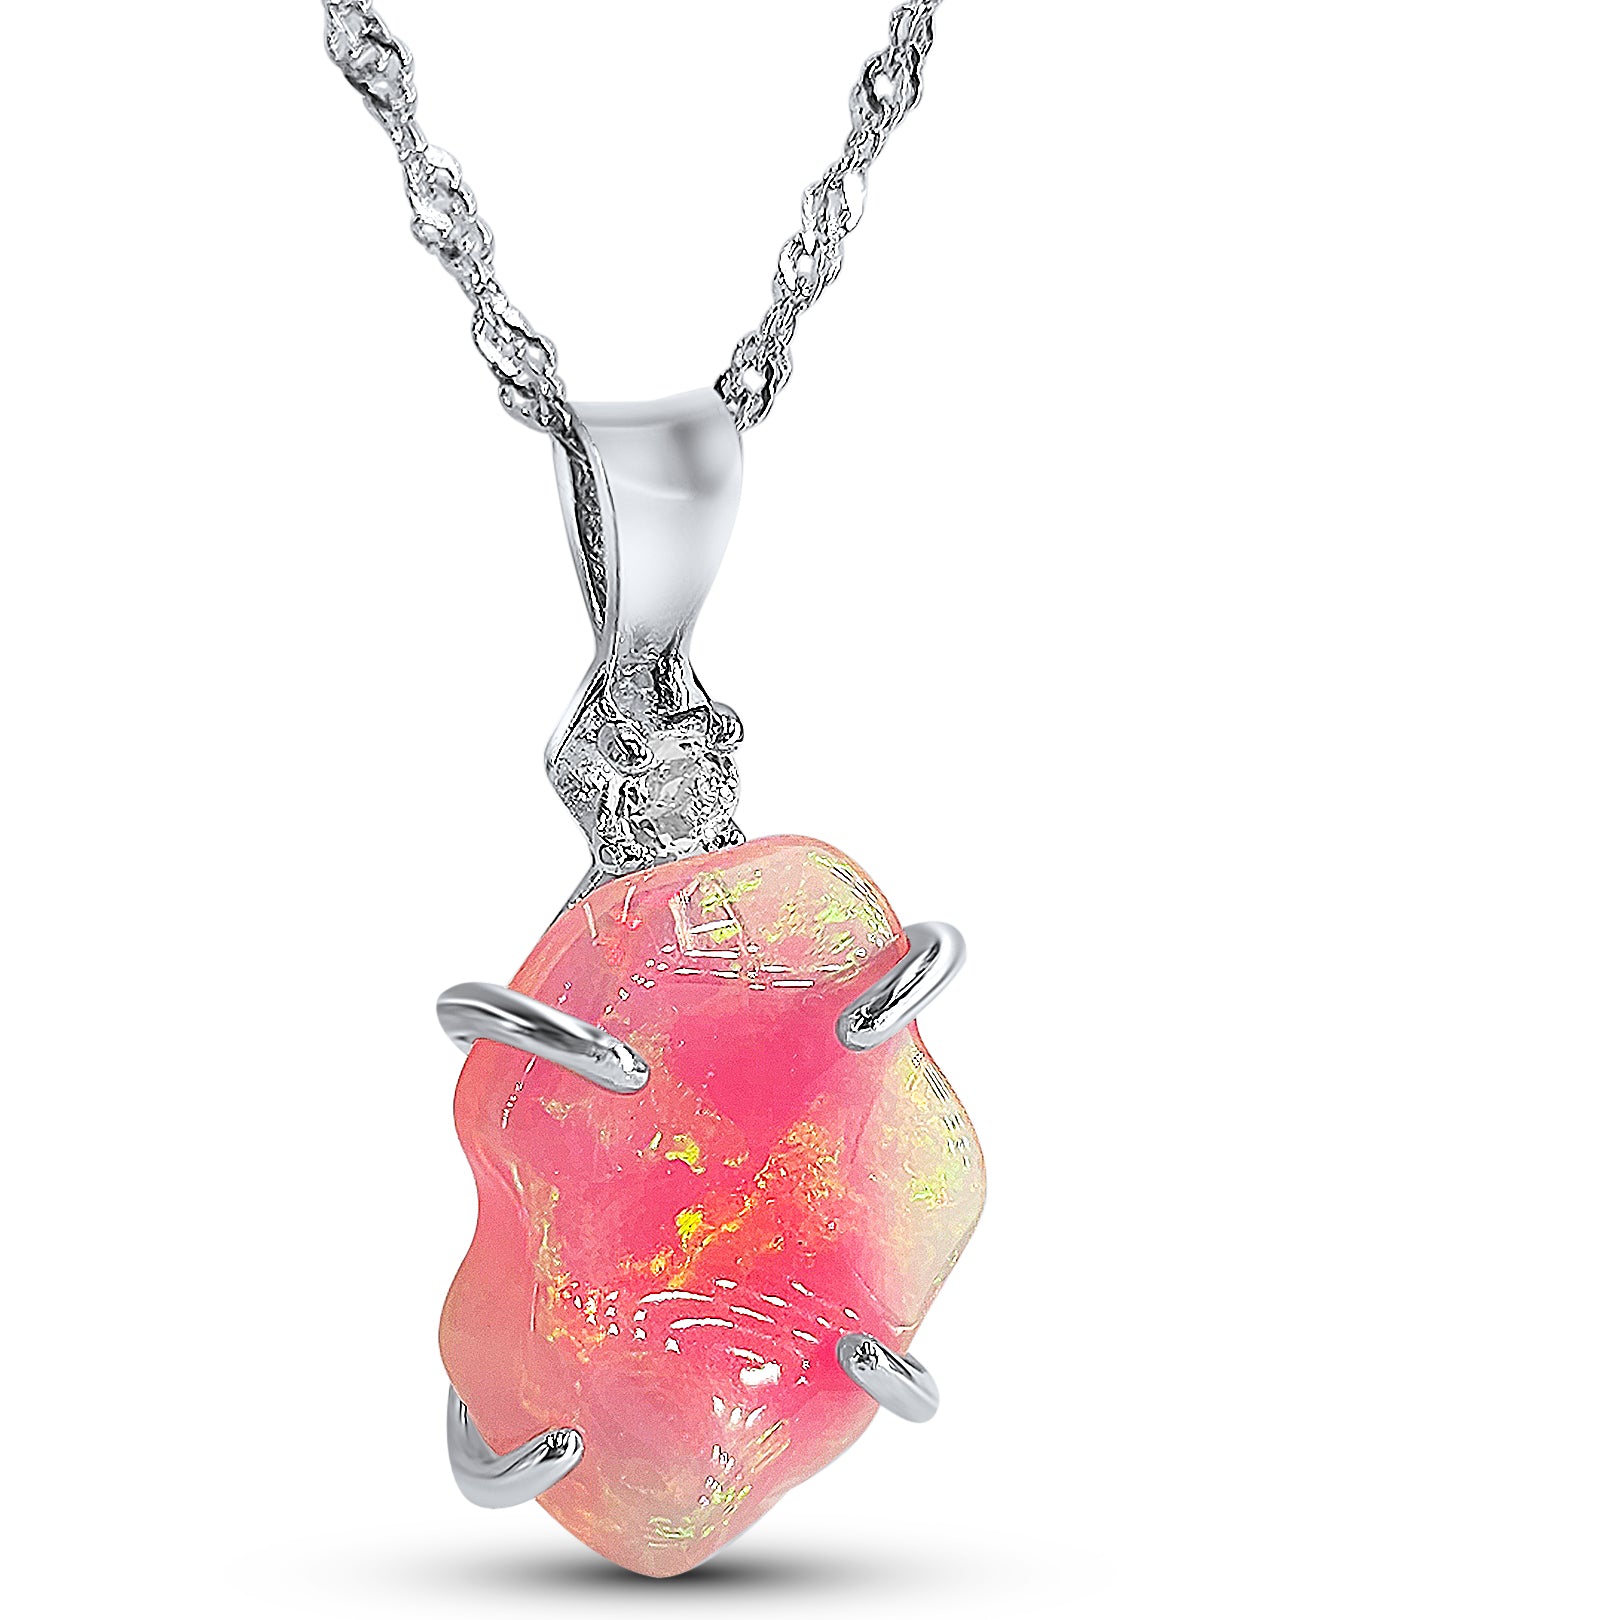 Raw Pink Opal Necklace